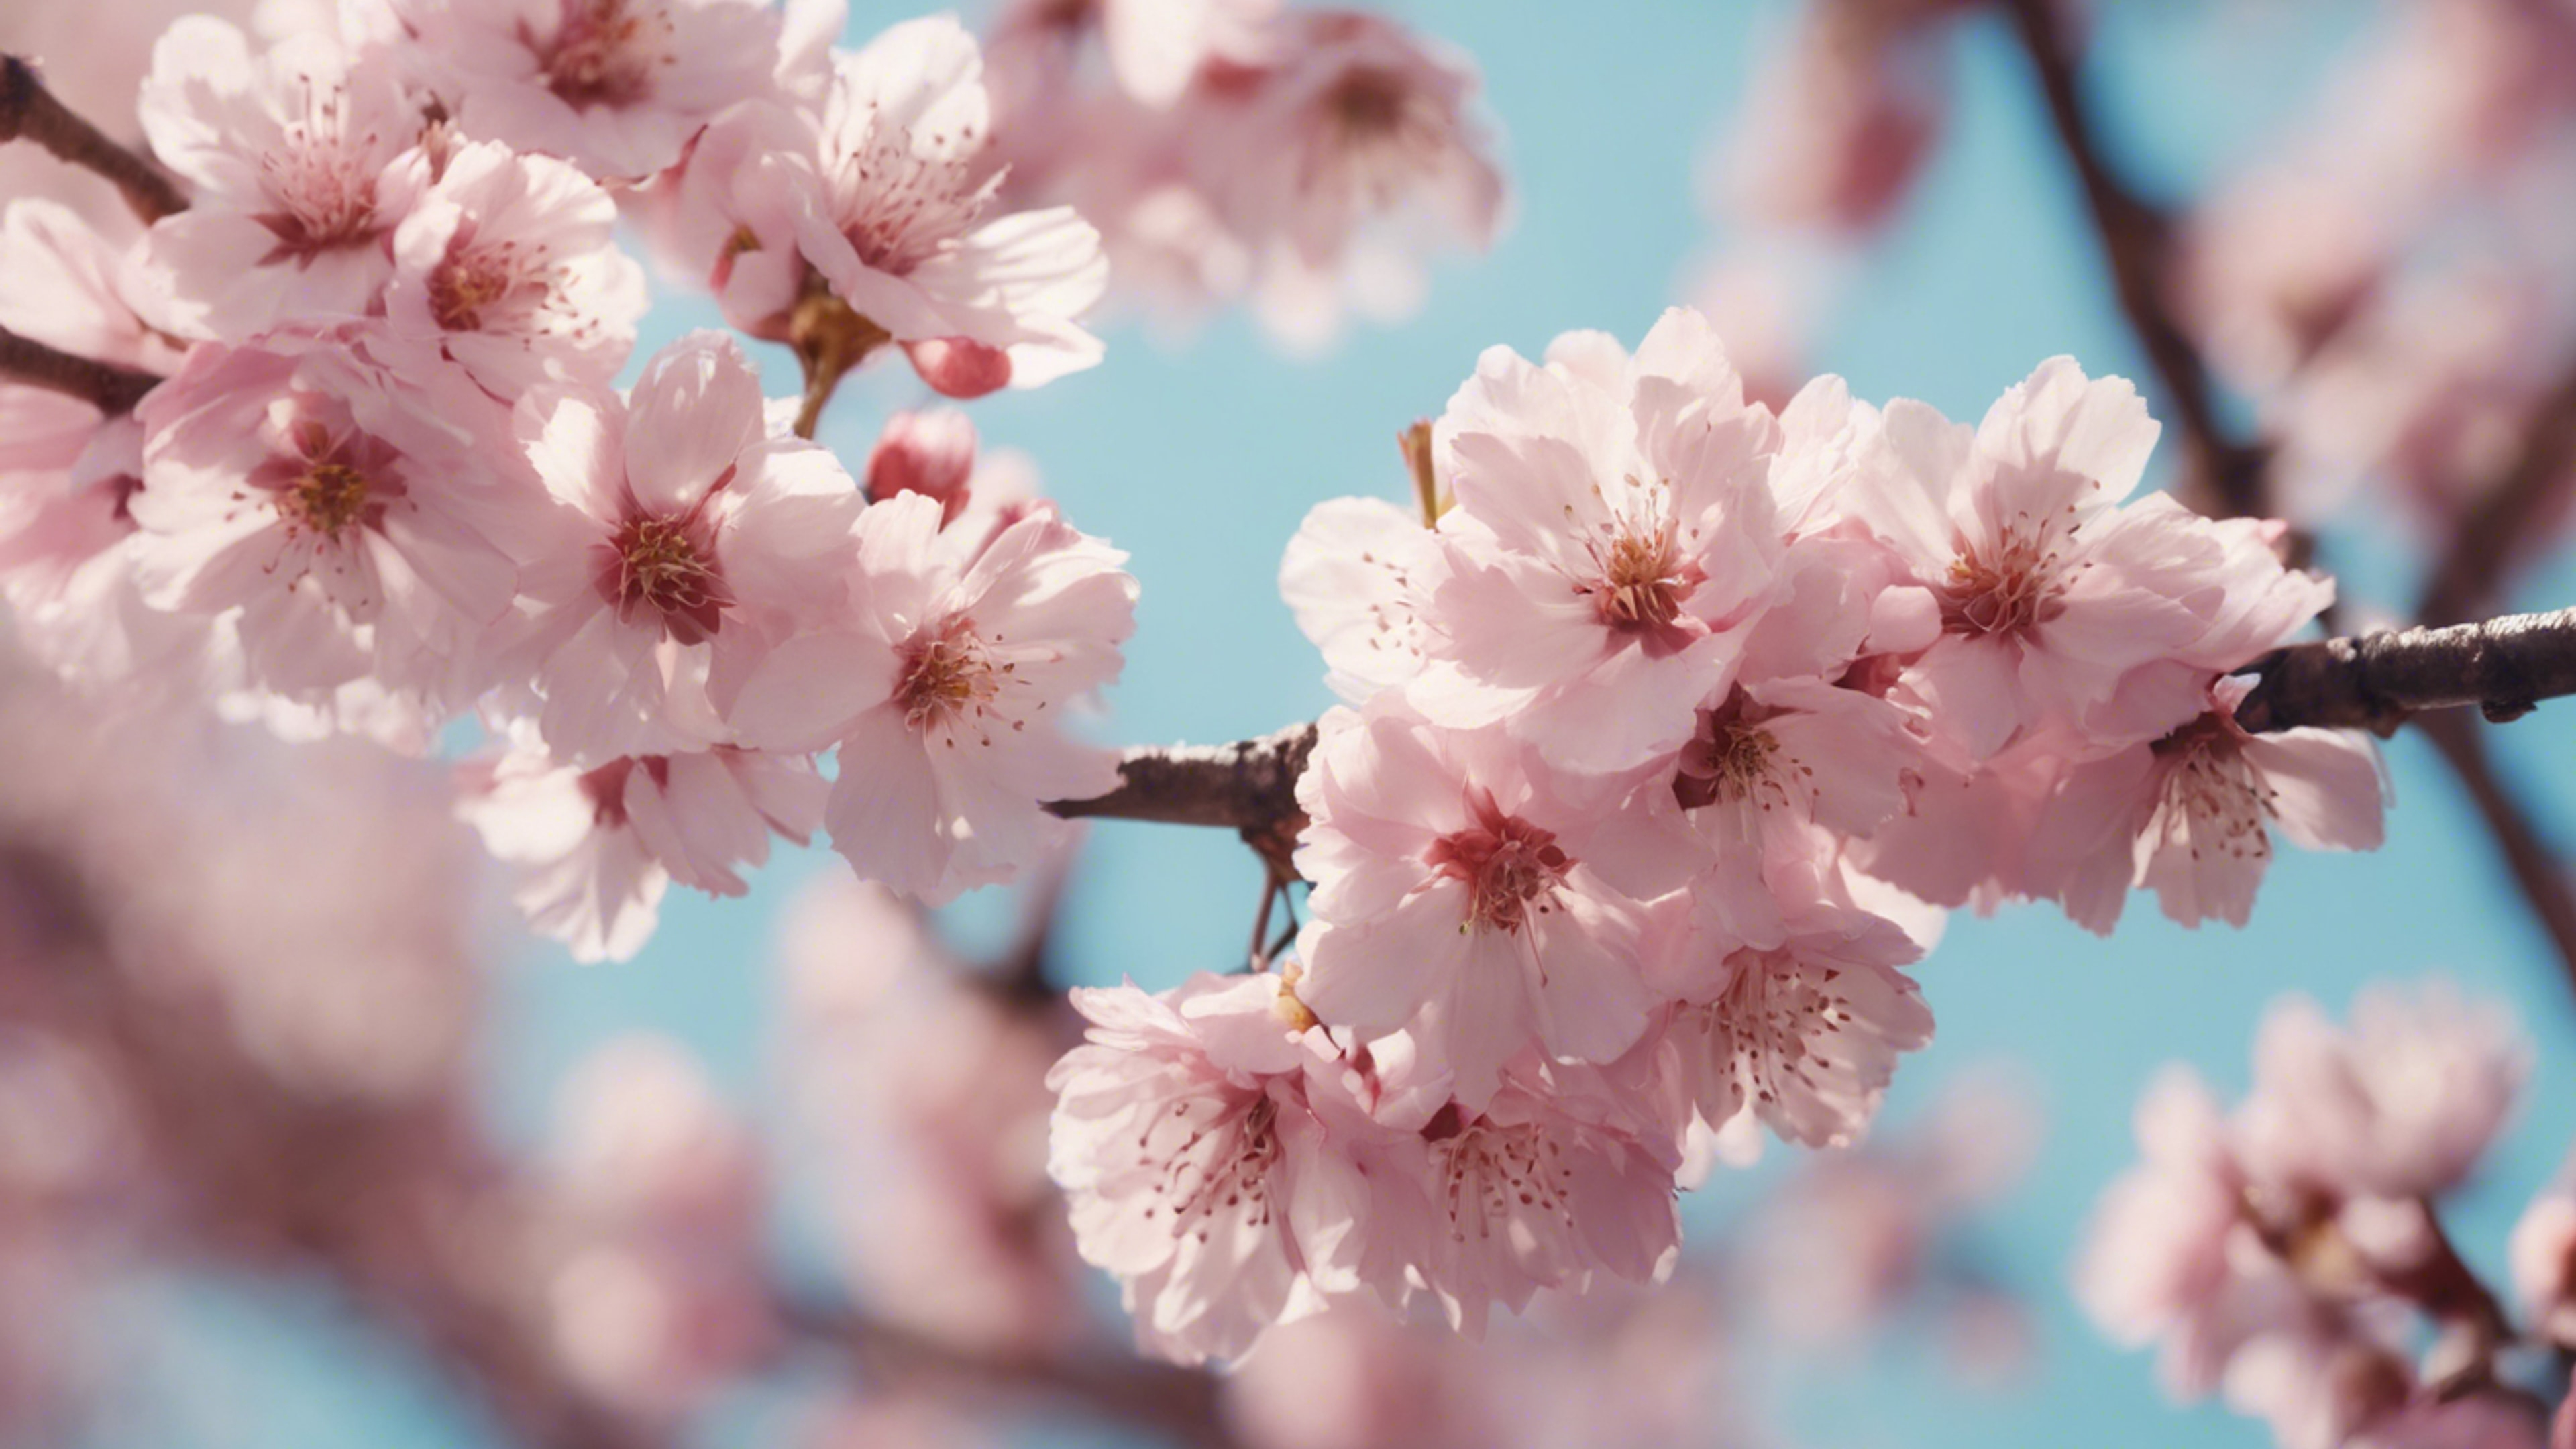 A vibrant scene of pastel pink cherry blossoms falling gently. Валлпапер[c8bce7433f184c22a8f5]